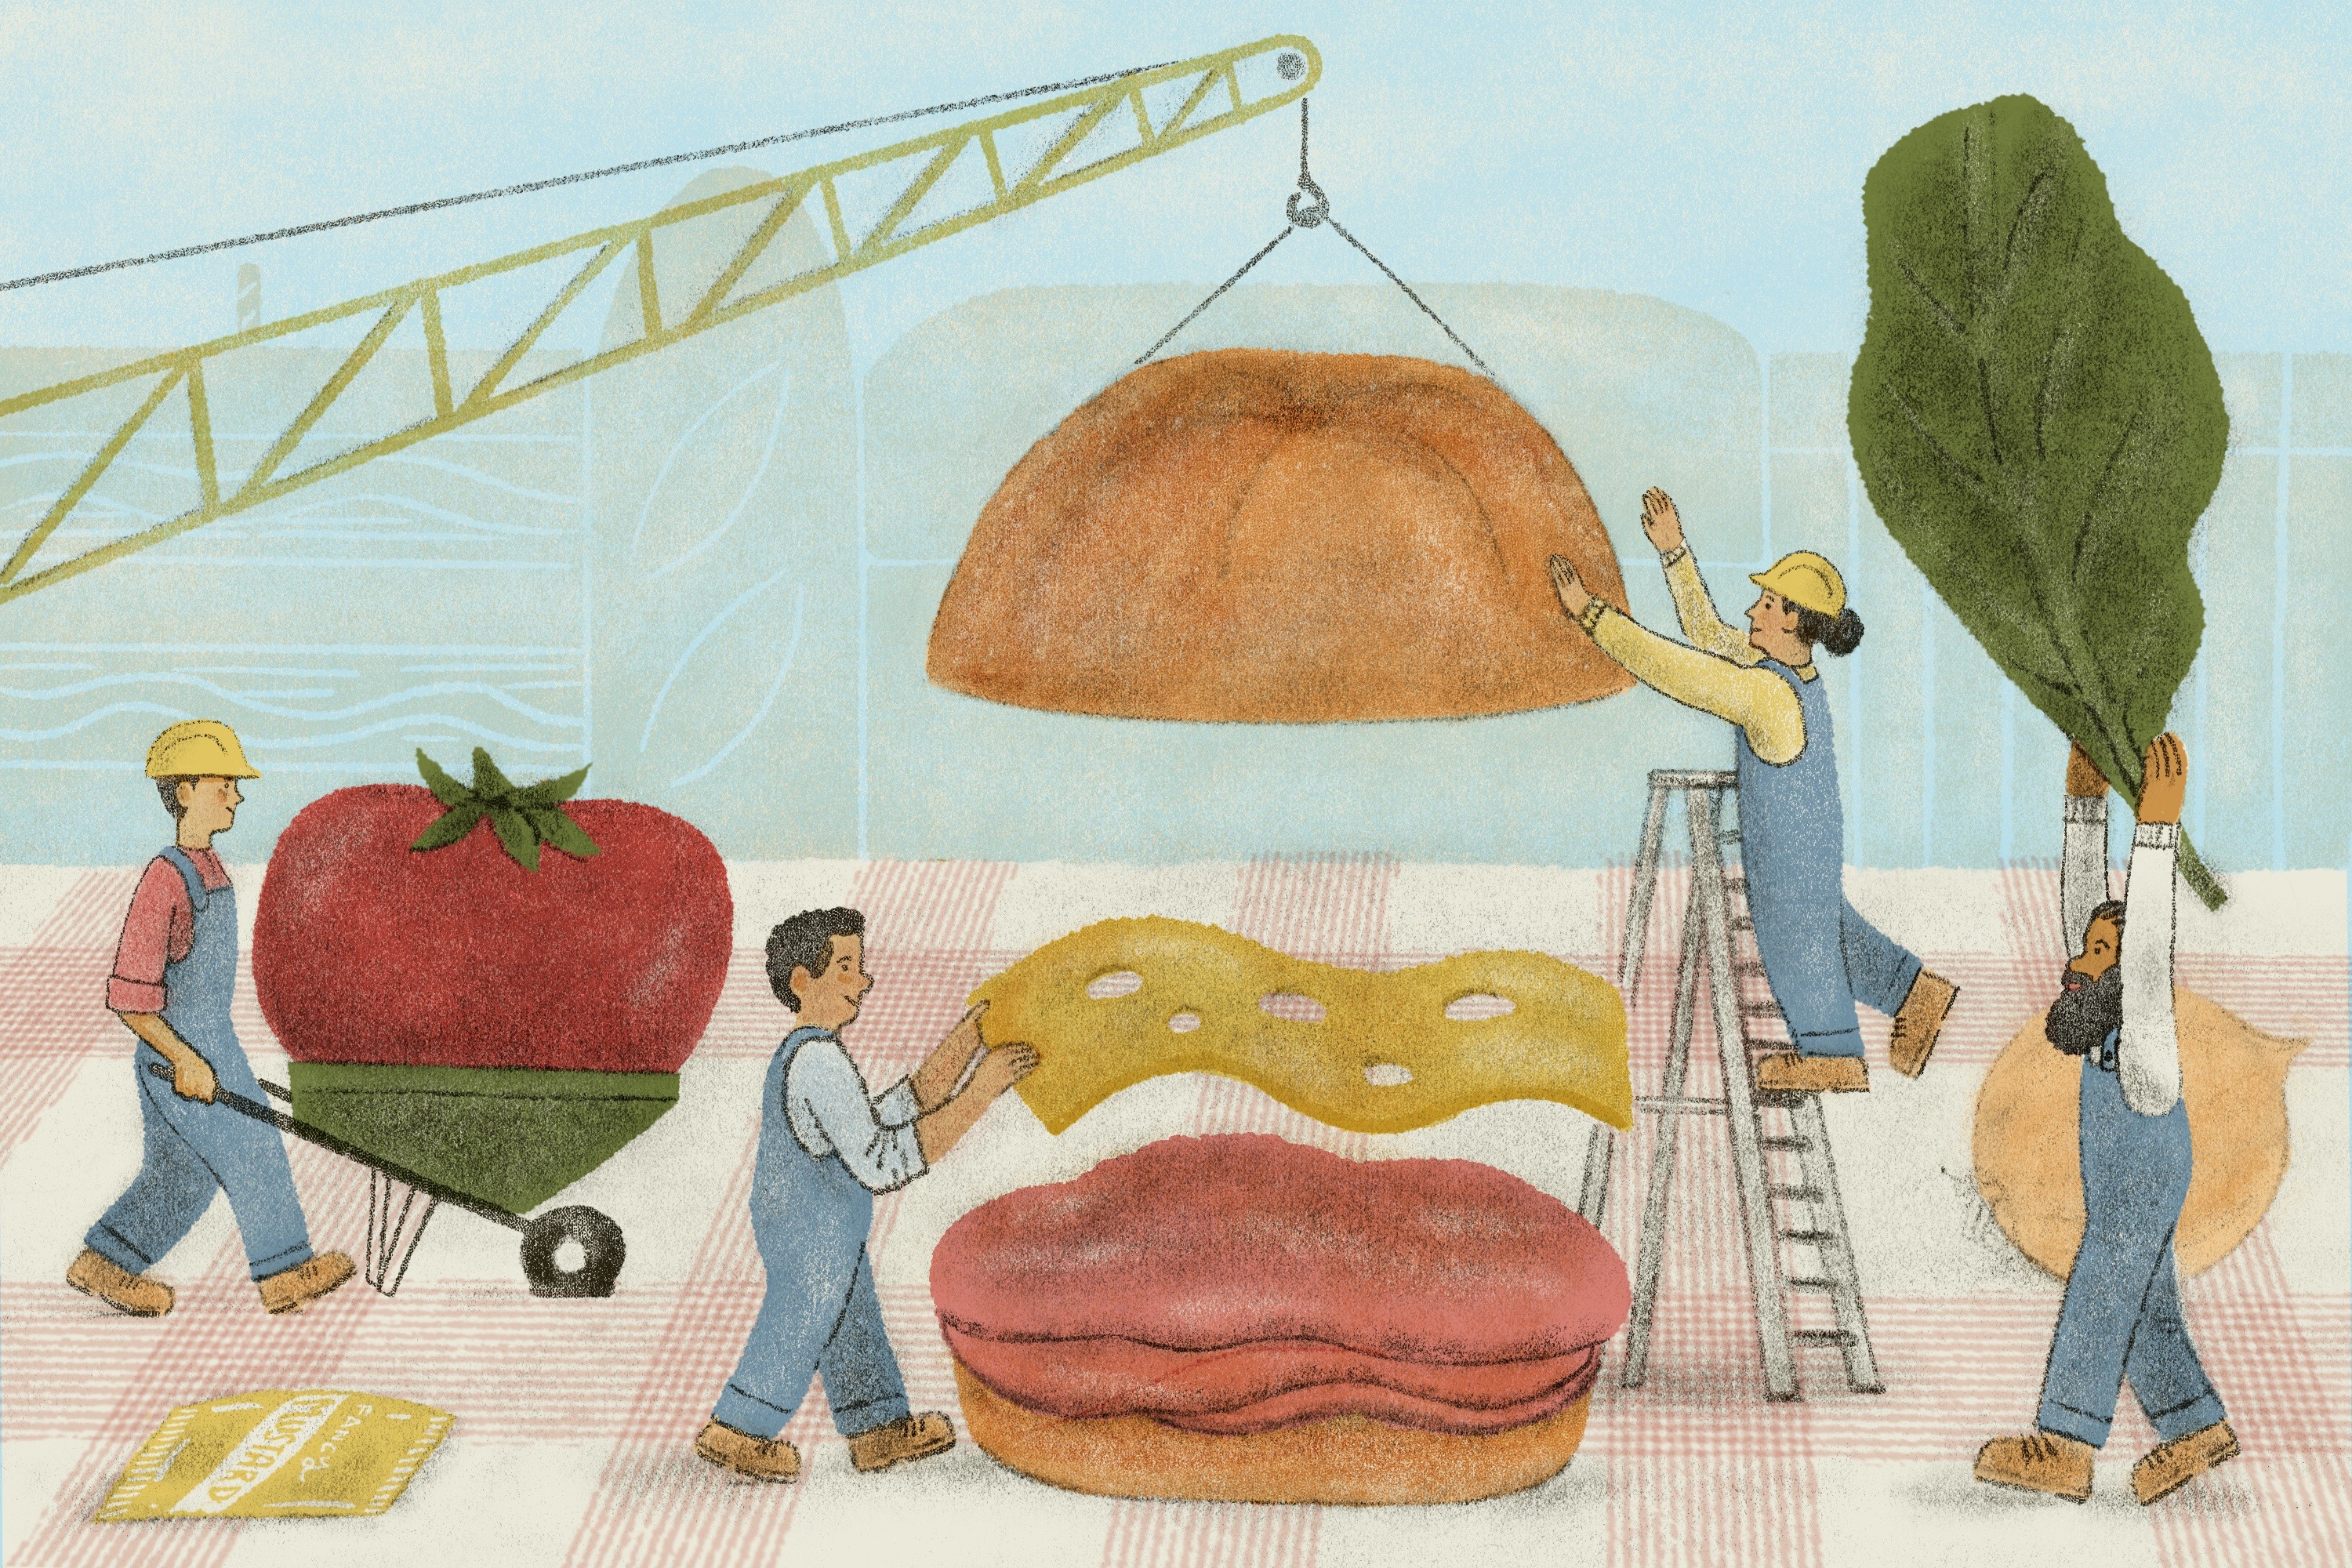 Whimsical illustration of construction workers assembling a sandwich, with a bread bun on a crane.